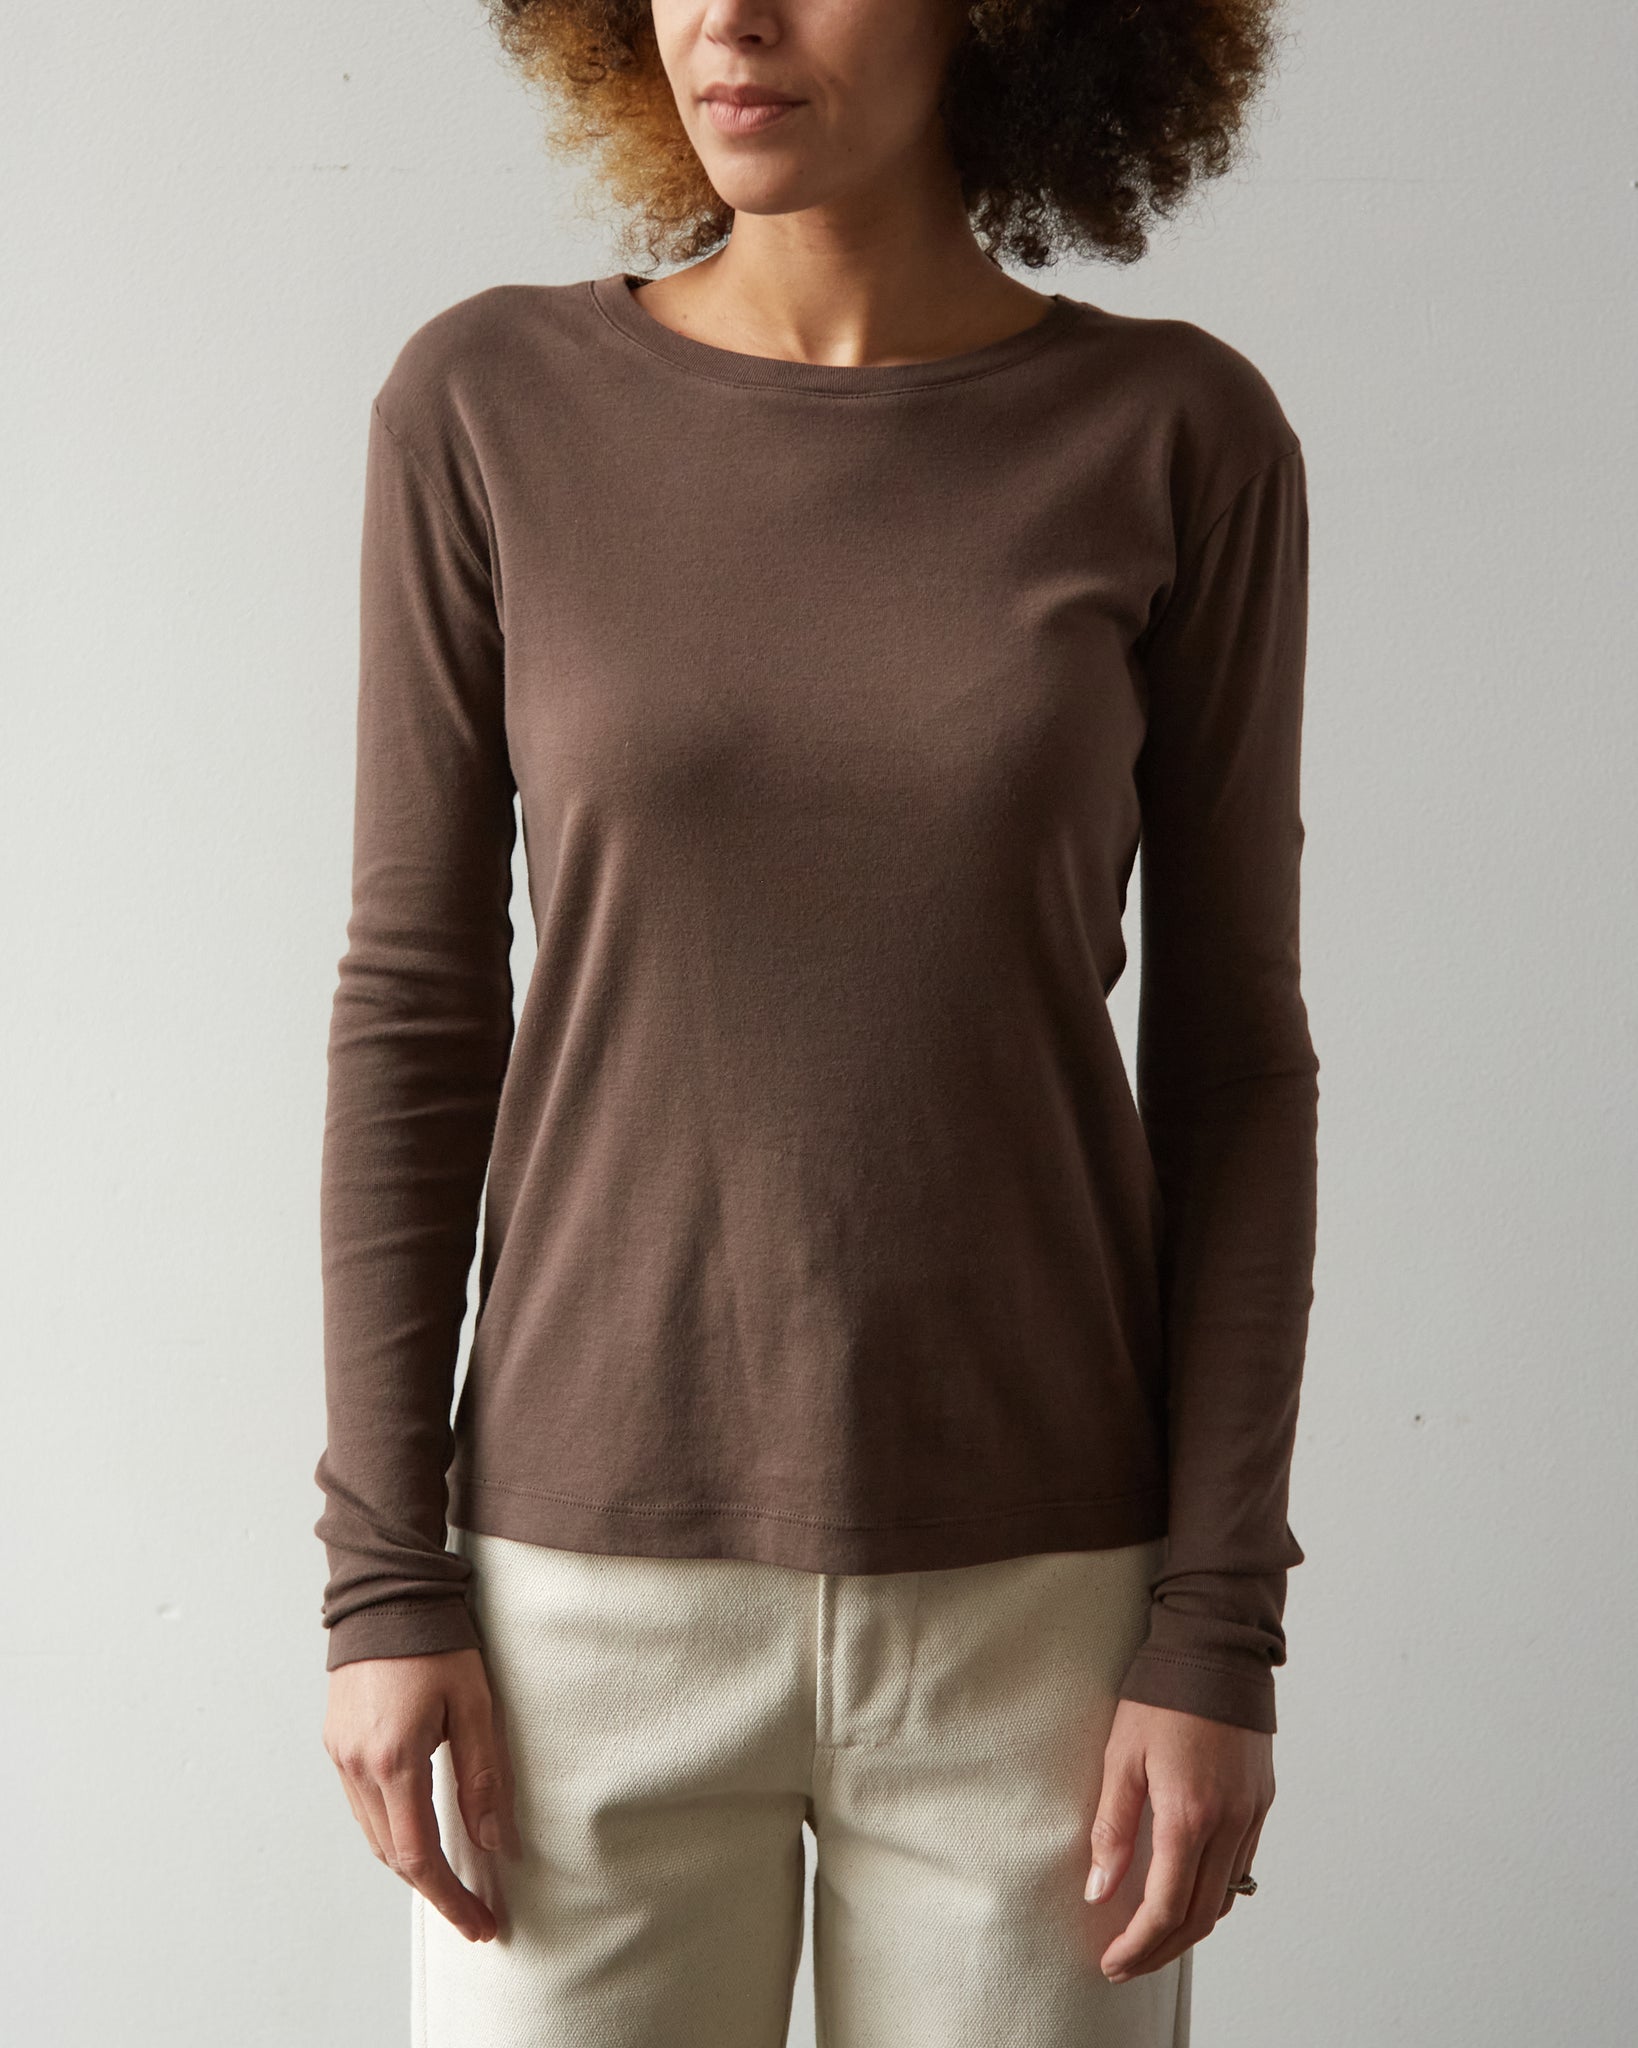 Cotton On Staple Rib Scoop Neck Long Sleeves Top 2024, Buy Cotton On  Online